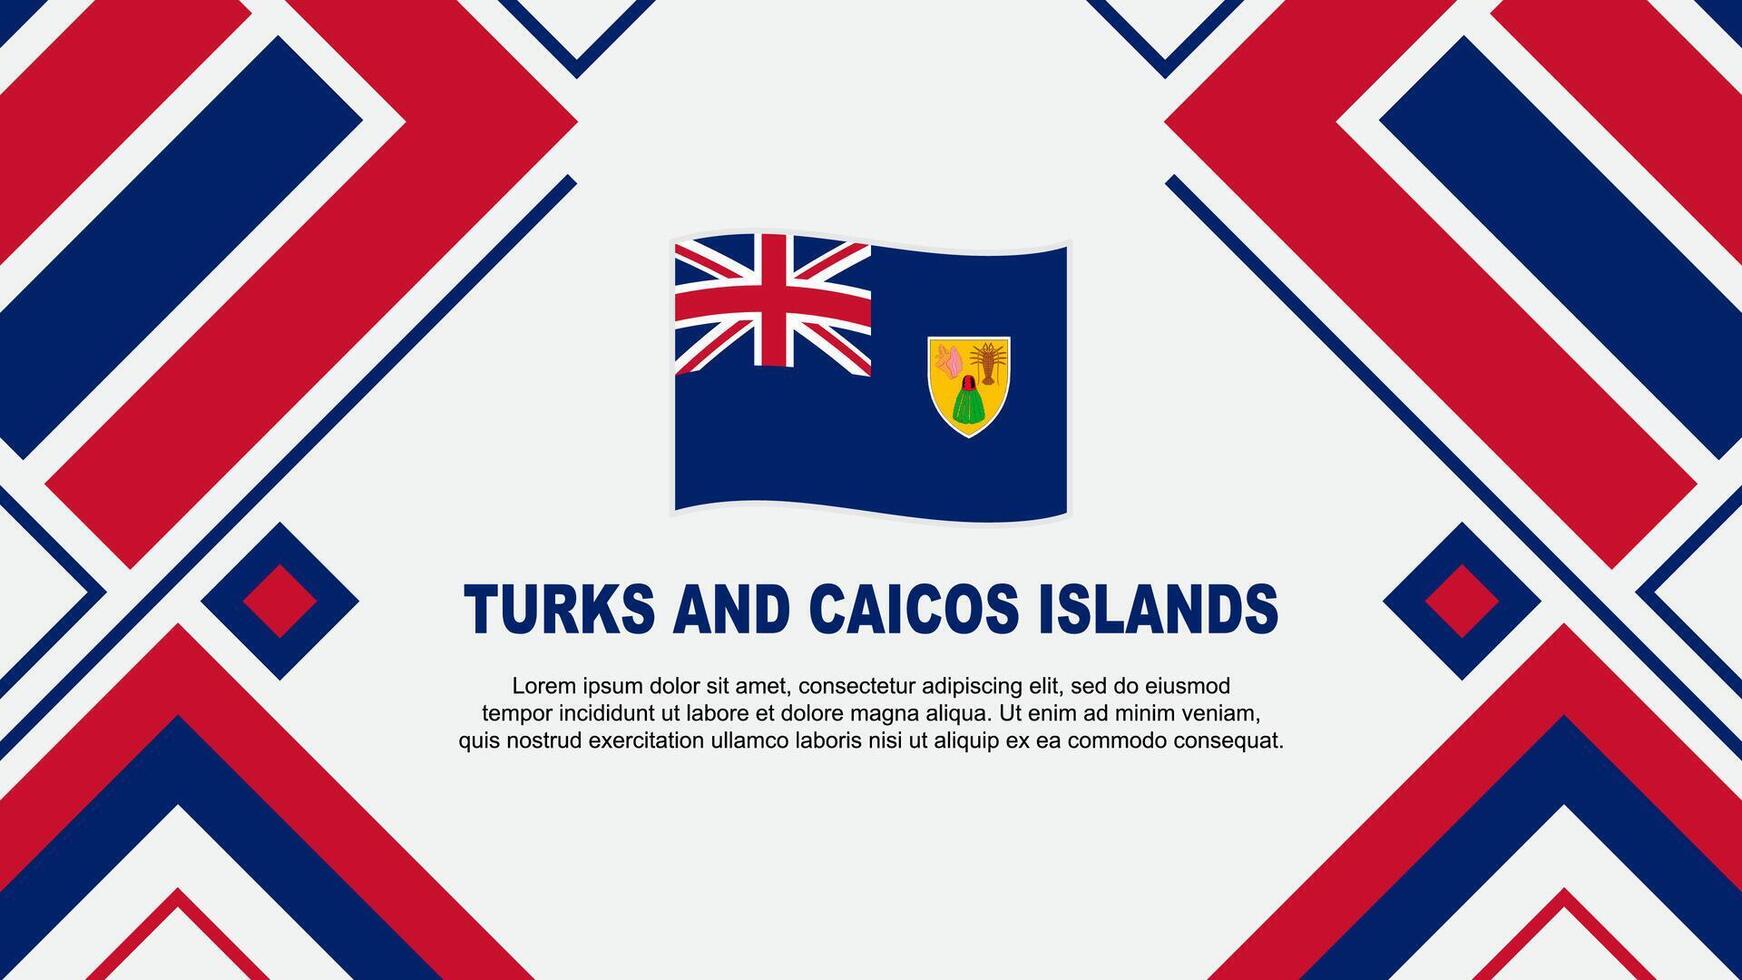 Turks And Caicos Islands Flag Abstract Background Design Template. Turks And Caicos Islands Independence Day Banner Wallpaper Vector Illustration. Flag